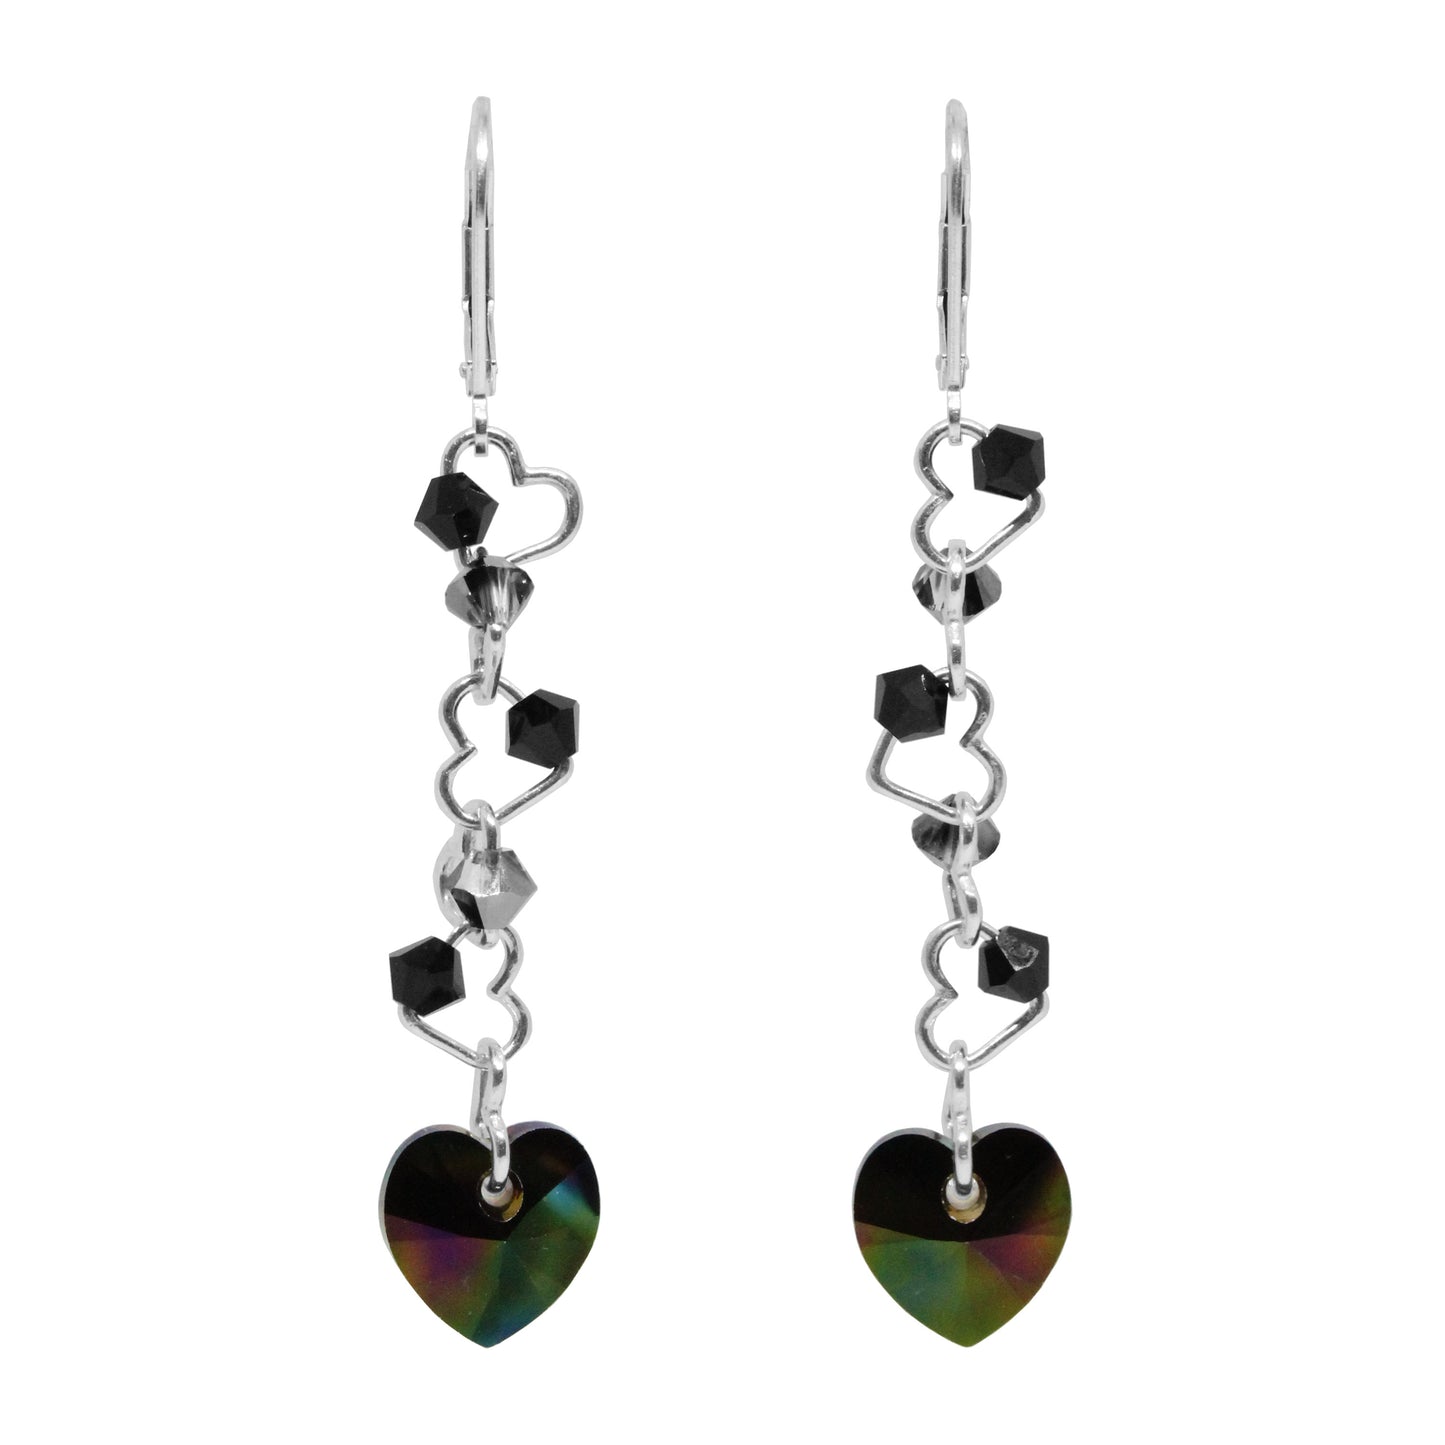 Crystal Passion Earrings / 57mm Length / sterling silver leverbacks / choose a heart crystal color from red, pink or dark rainbow